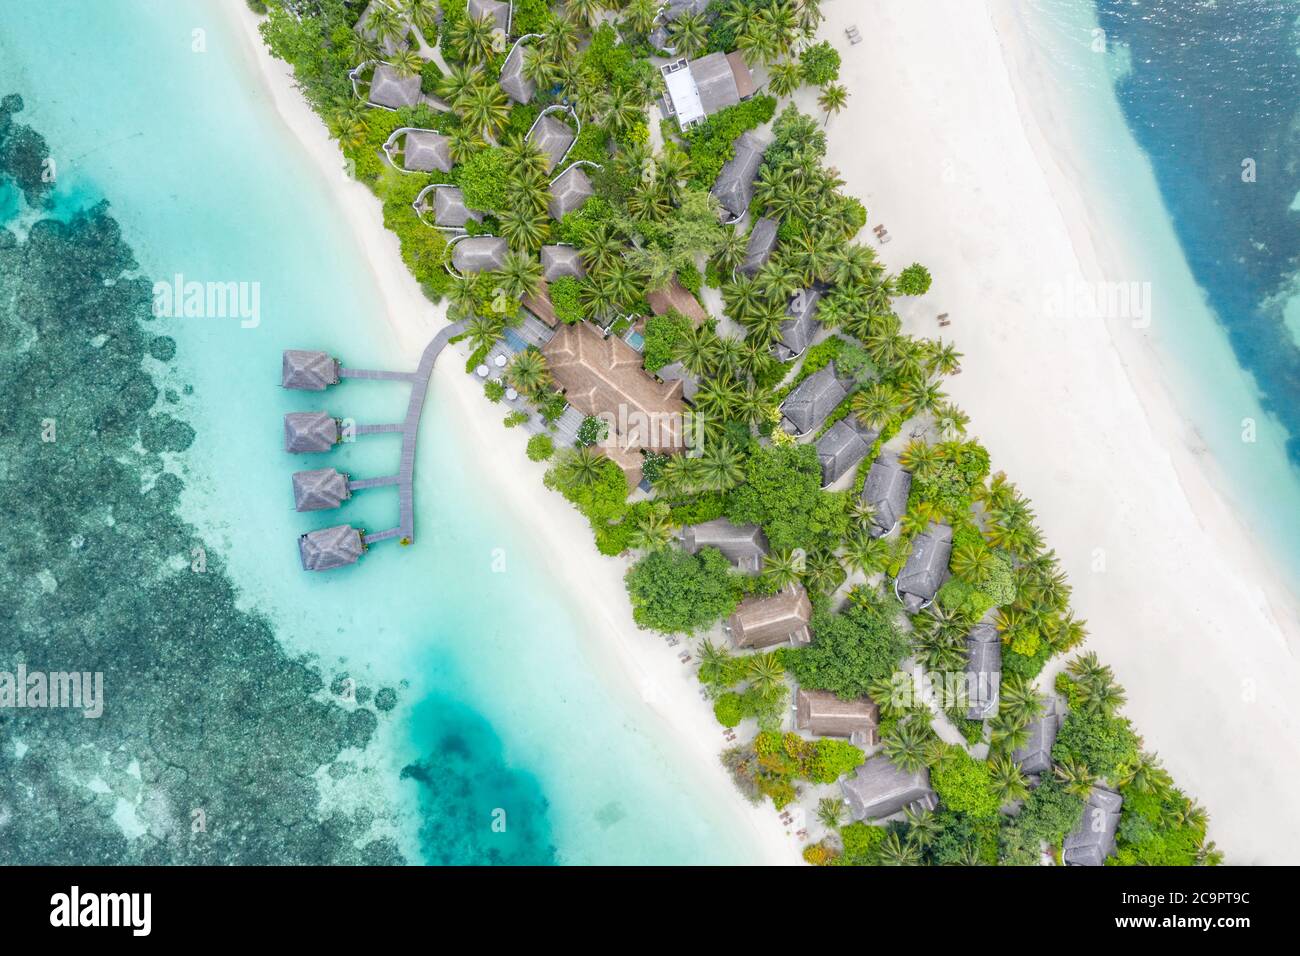 Amazing bird eyes view in Maldives, landscape seascape aerial view over a Maldives. Landscape, luxury tropical resort or hotel with water villas beach Stock Photo